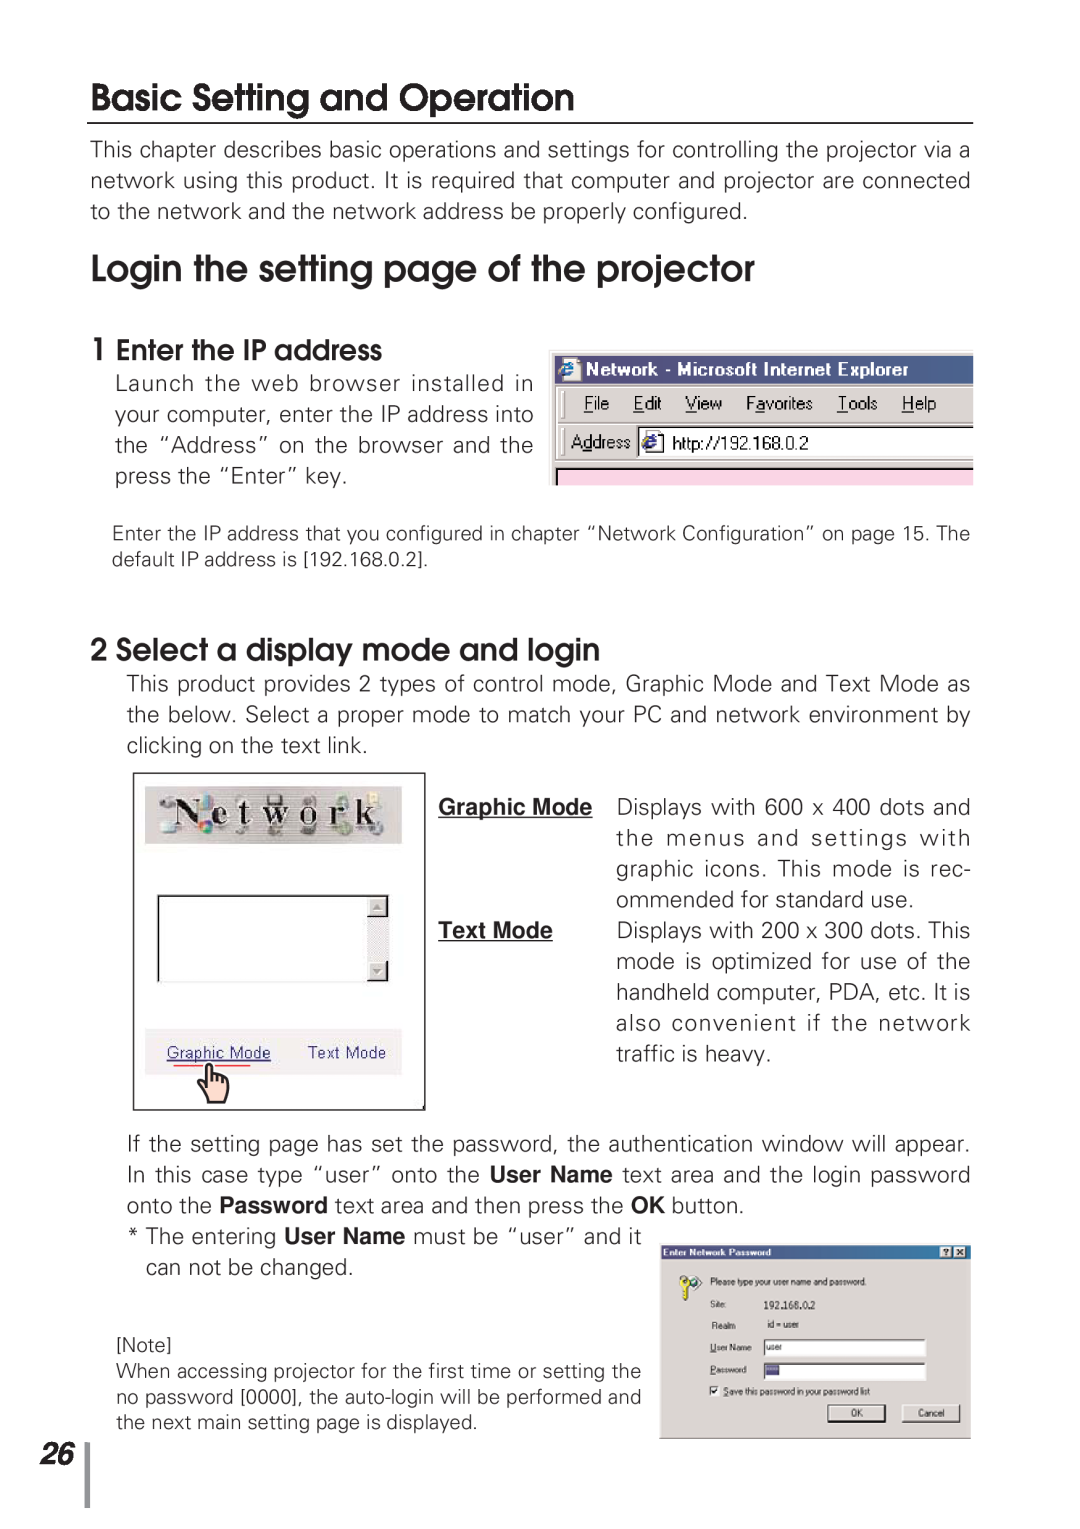 Eiki MD13NET Basic Setting and Operation, Login the setting page of the projector, Select a display mode and login 